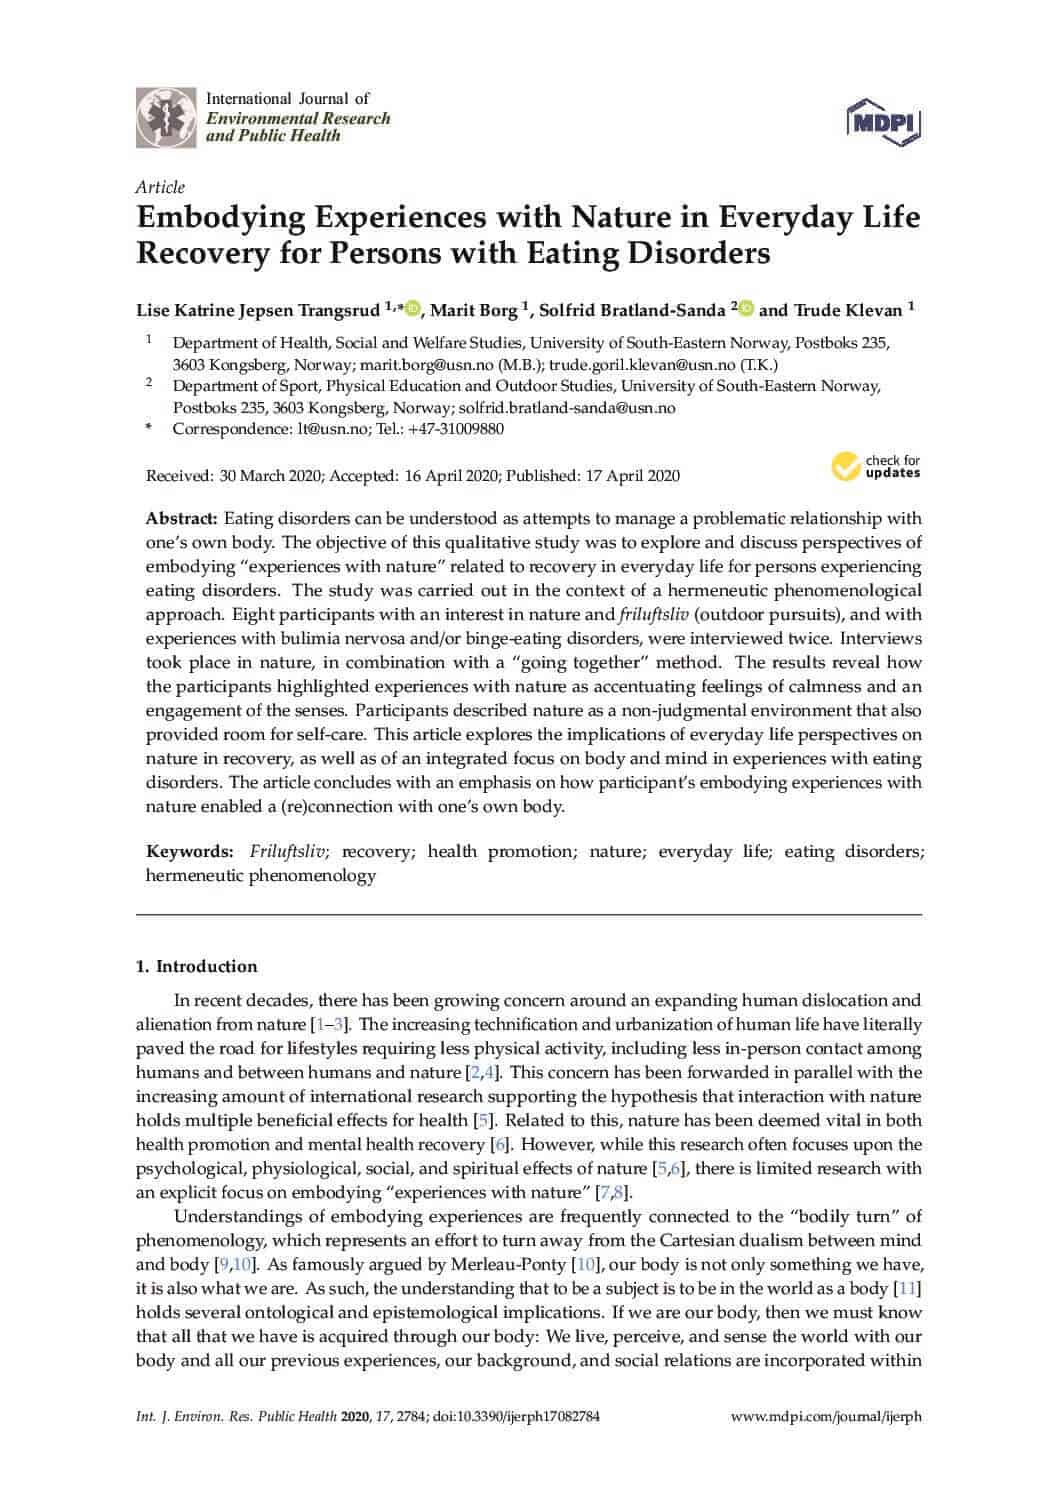 Embodying Experiences with Nature in Everyday Life Recovery for Persons with Eating Disorders